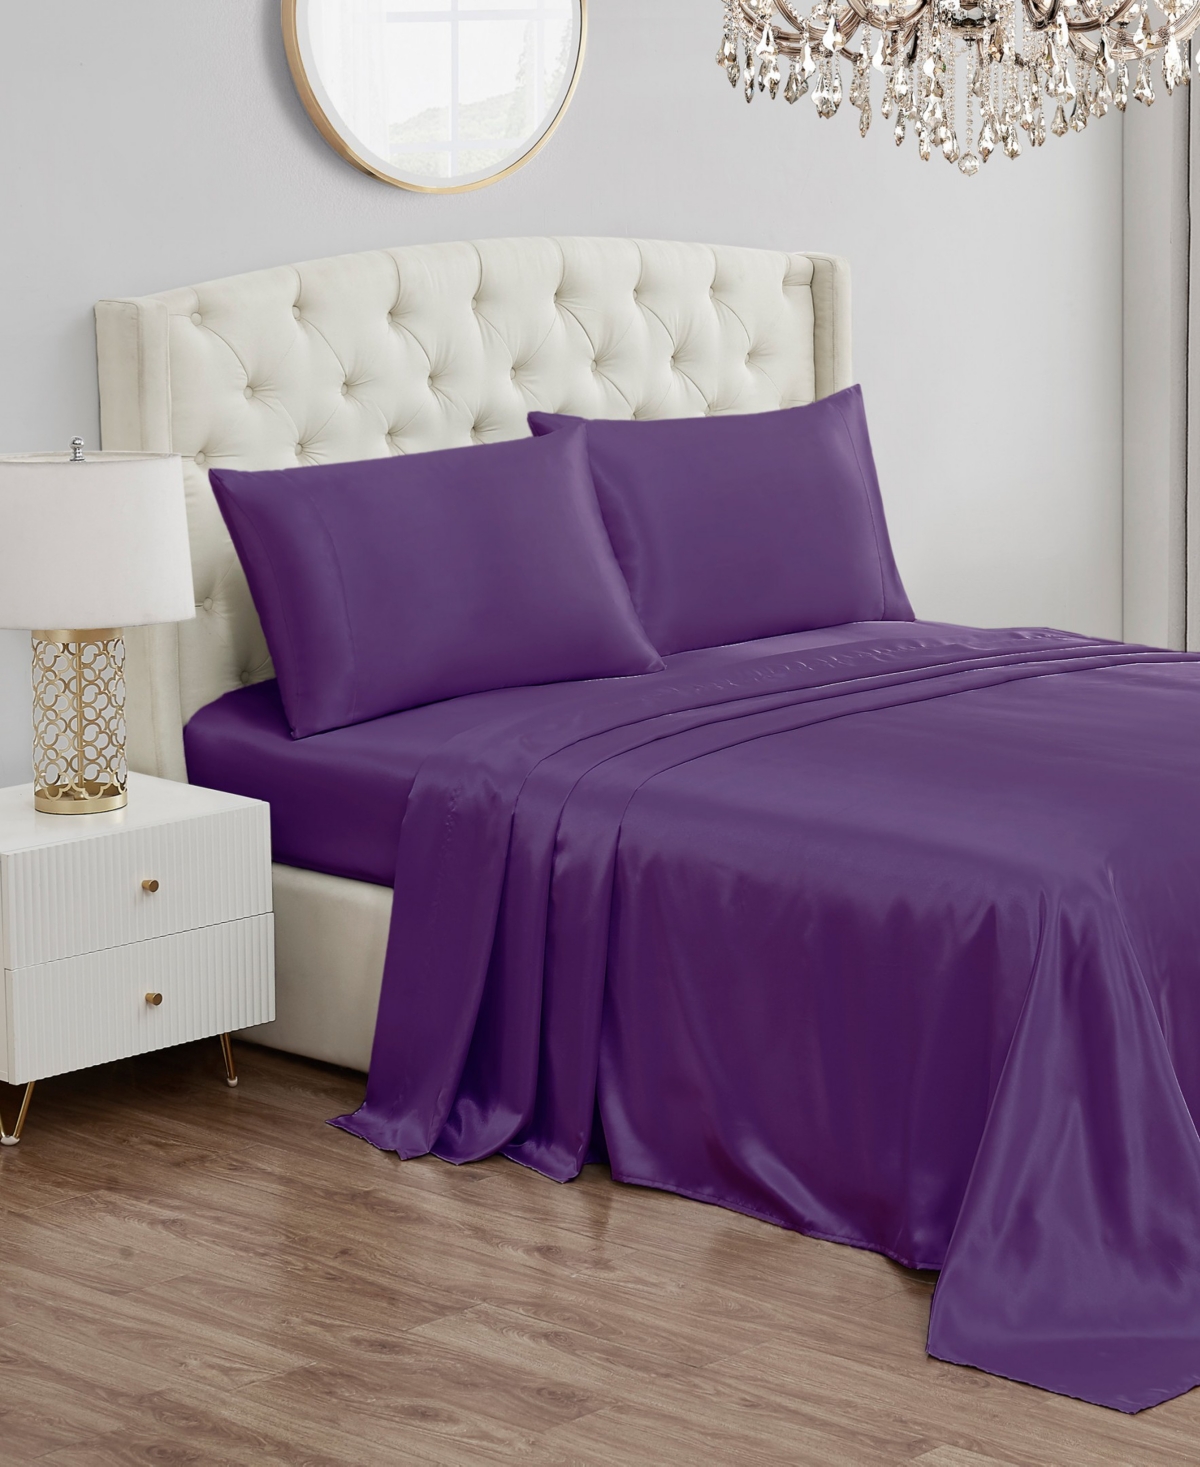 Juicy Couture Satin 4 Piece Sheet Set, Full In Purple